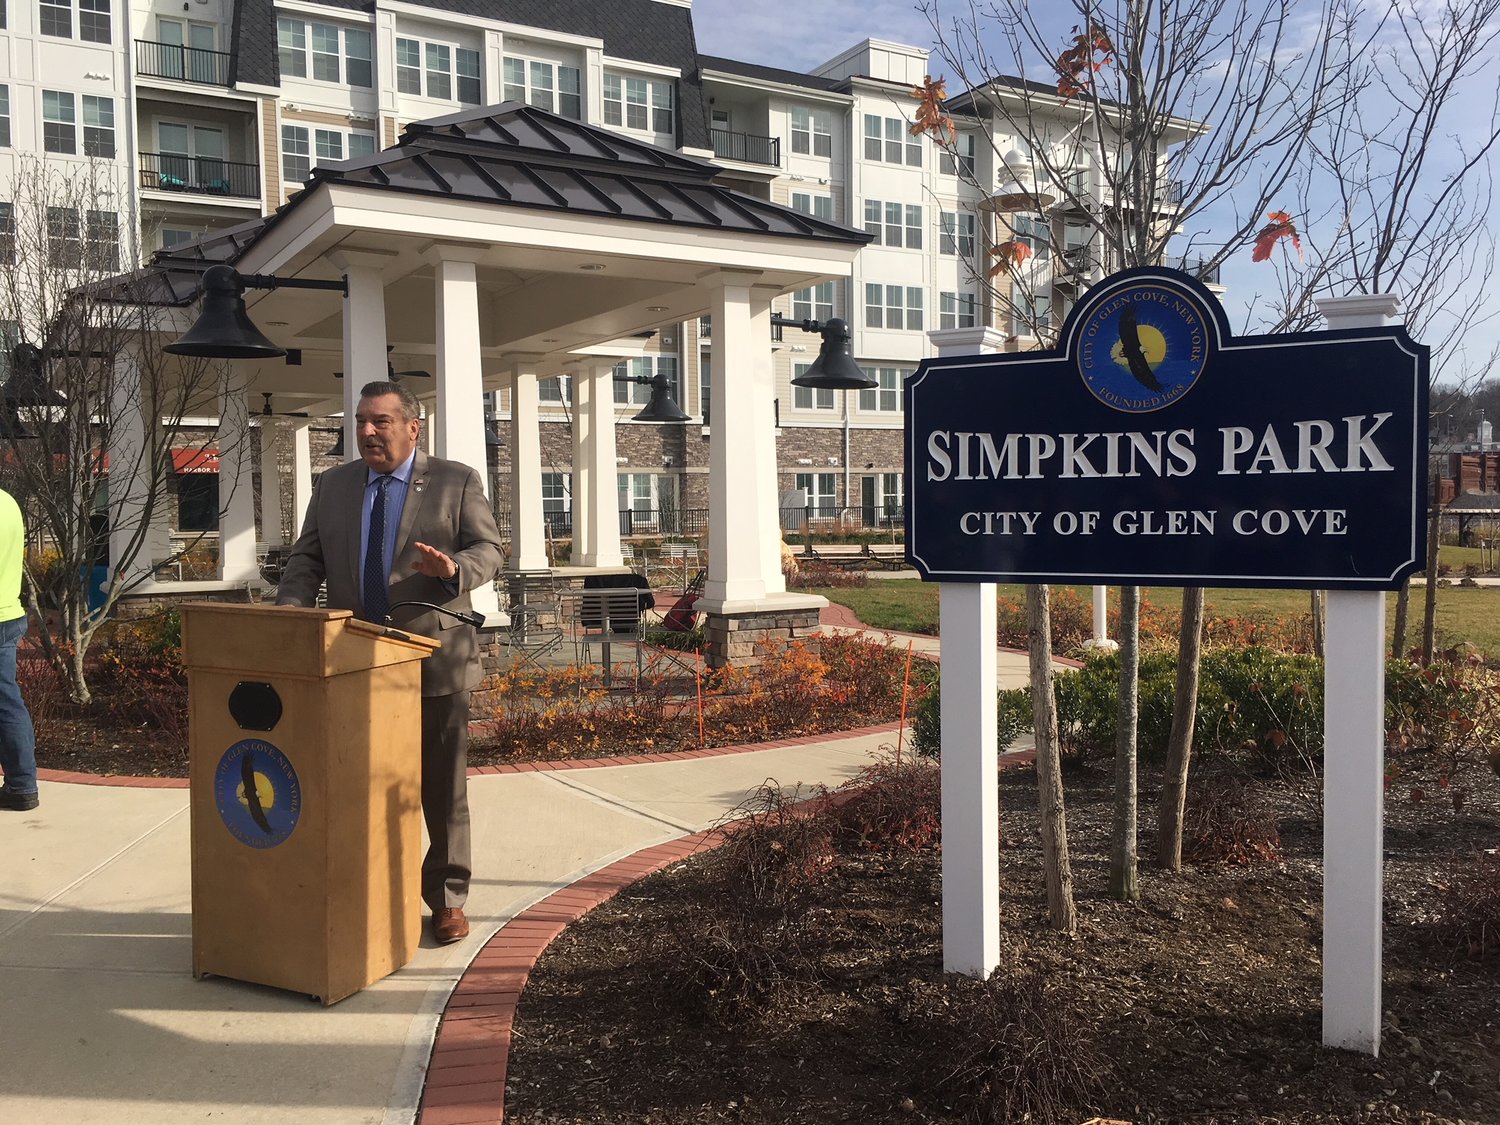 Mayor Tim Tenke spoke at the dedication of Simkins Park, where the new sign was unveiled. Tenke noted that there had been confusion over the spelling of the name, and said the sign would be changed to correct it.